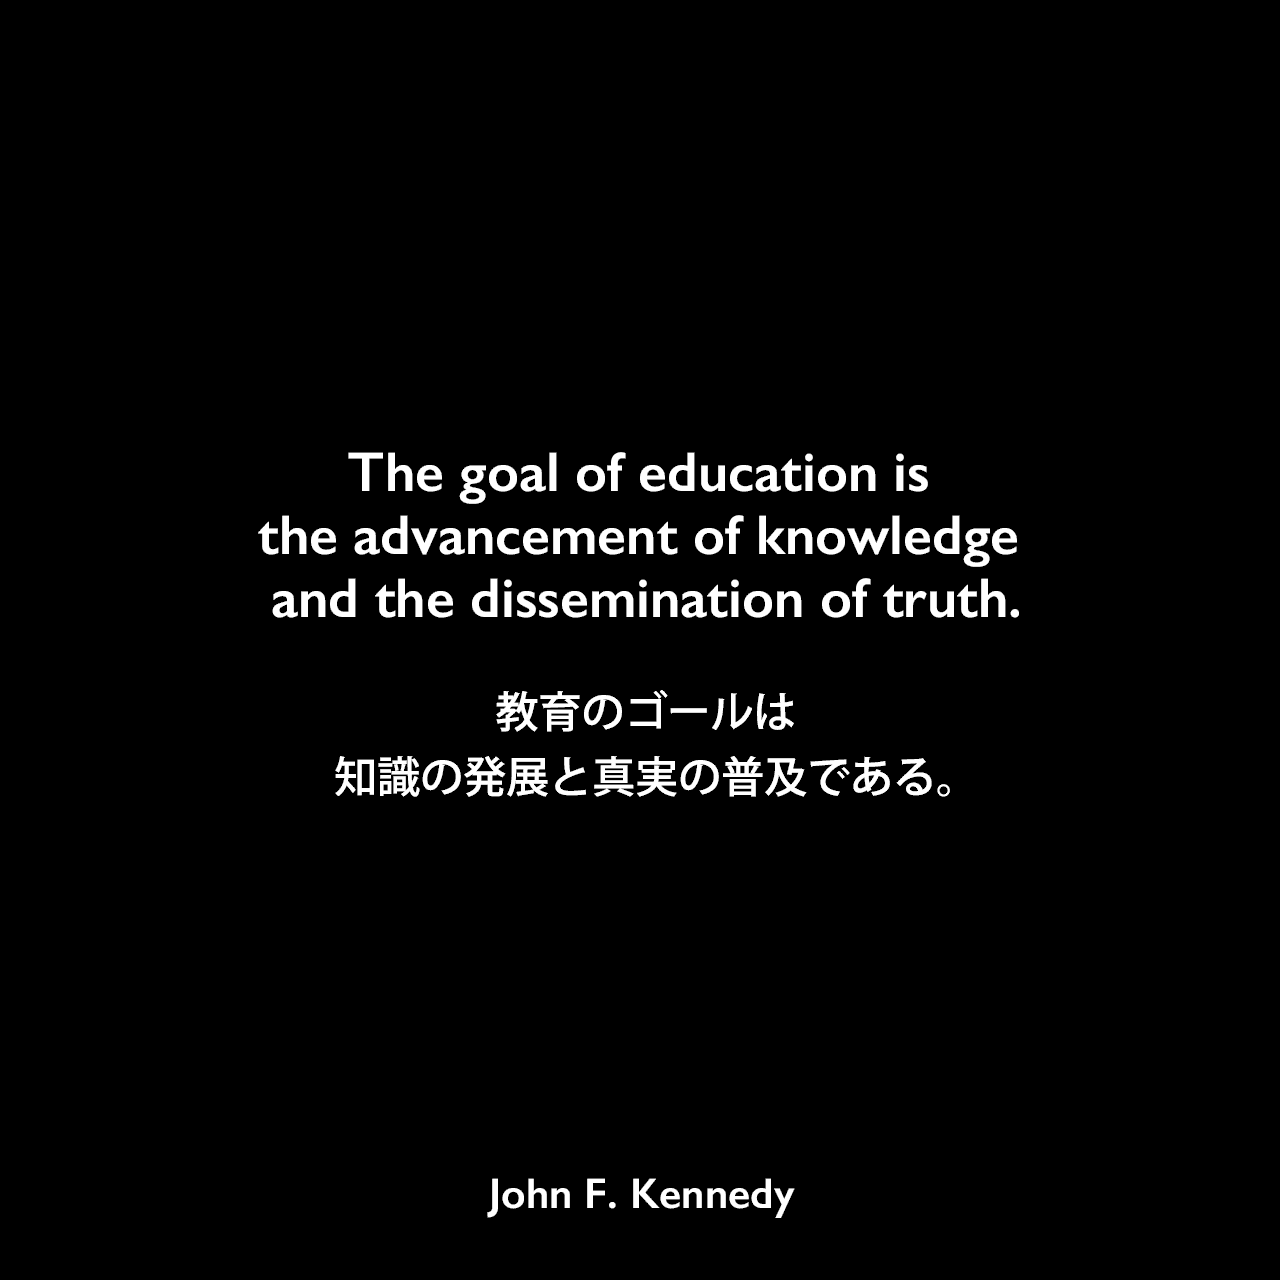 The goal of education is the advancement of knowledge and the dissemination of truth.教育のゴールは、知識の発展と真実の普及である。John F Kennedy